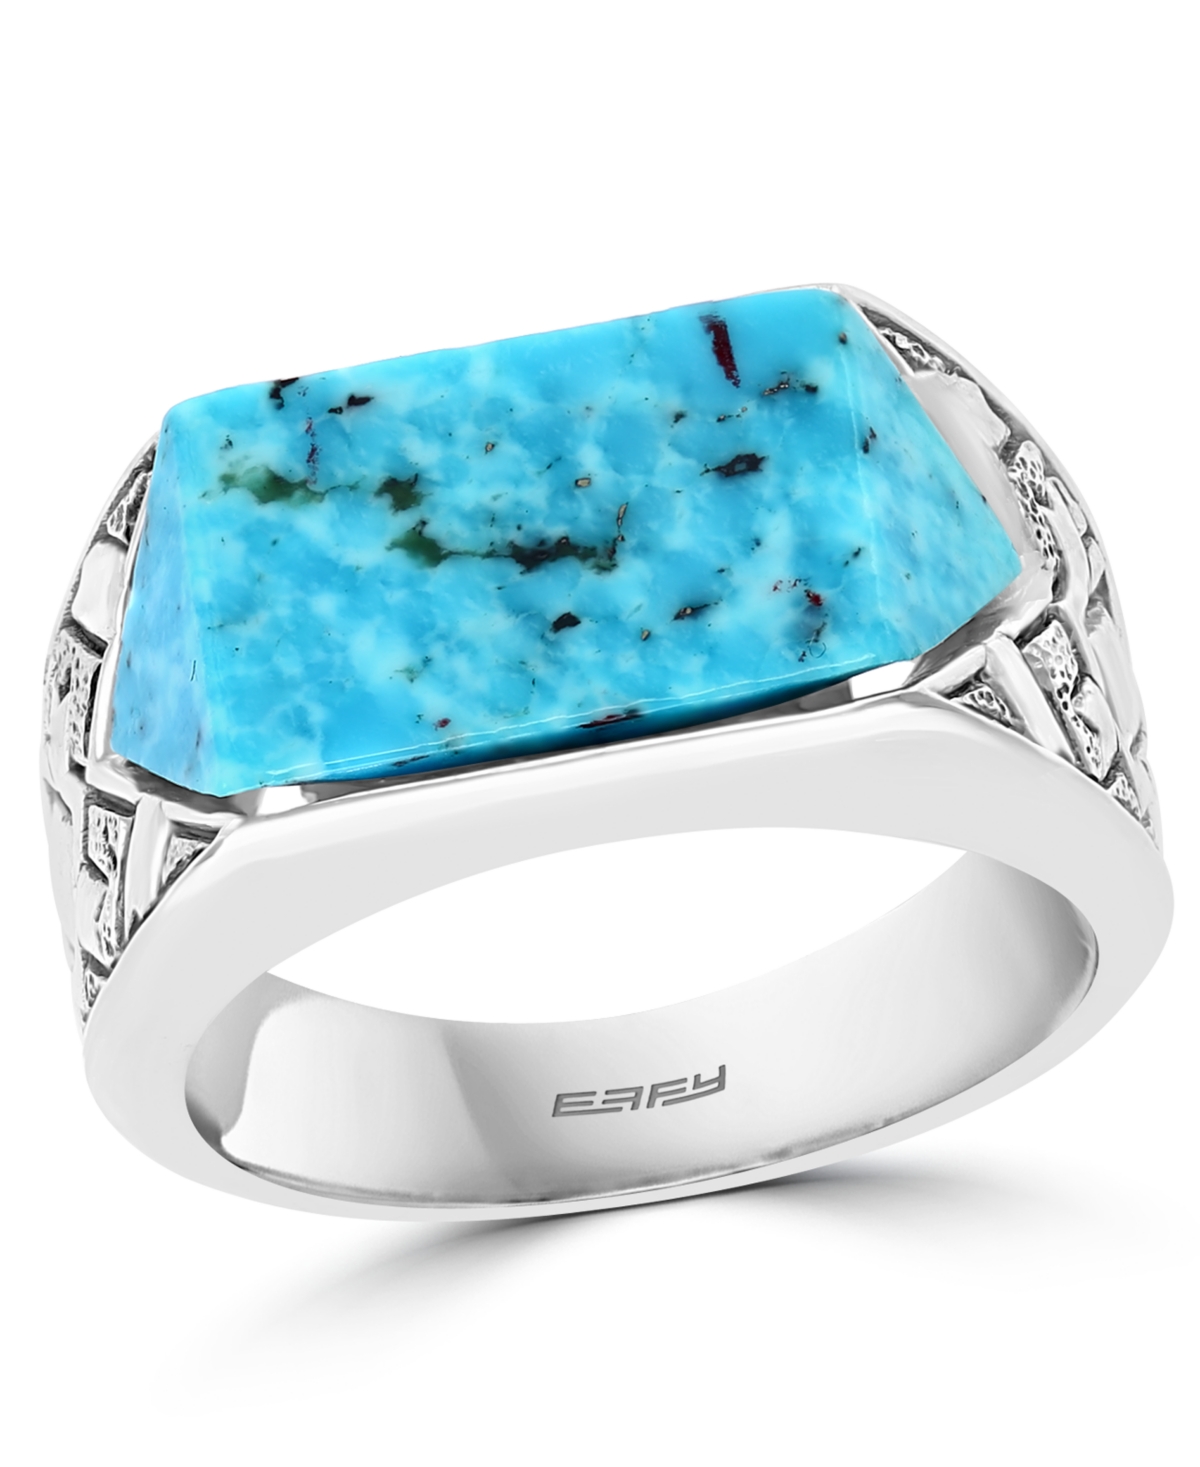 Effy Men's Turquoise Ring in Sterling Silver - Sterling Silver